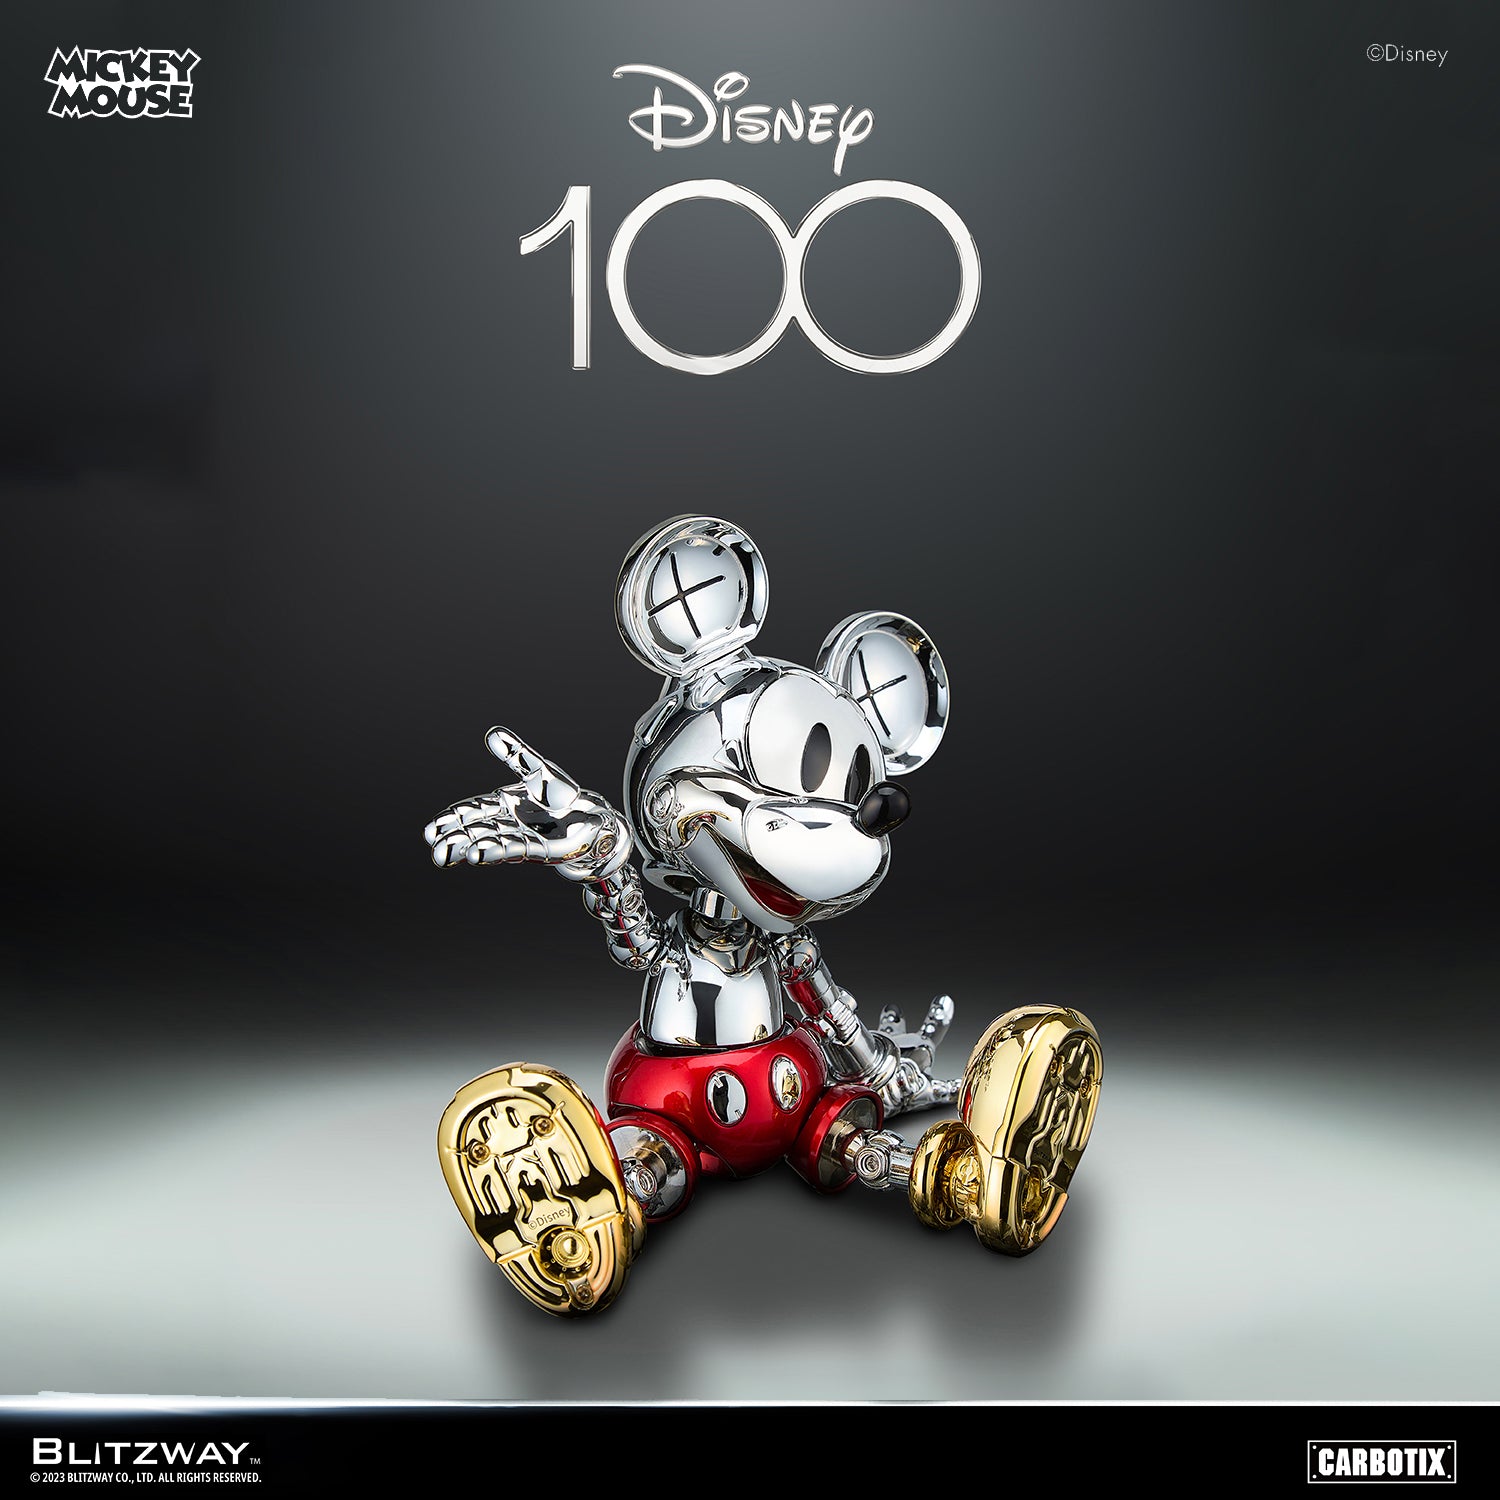 Blitzway - Carbotix Series - Disney D100 Mickey Mouse (Chrome Ver.) (Limited Edition) - Marvelous Toys